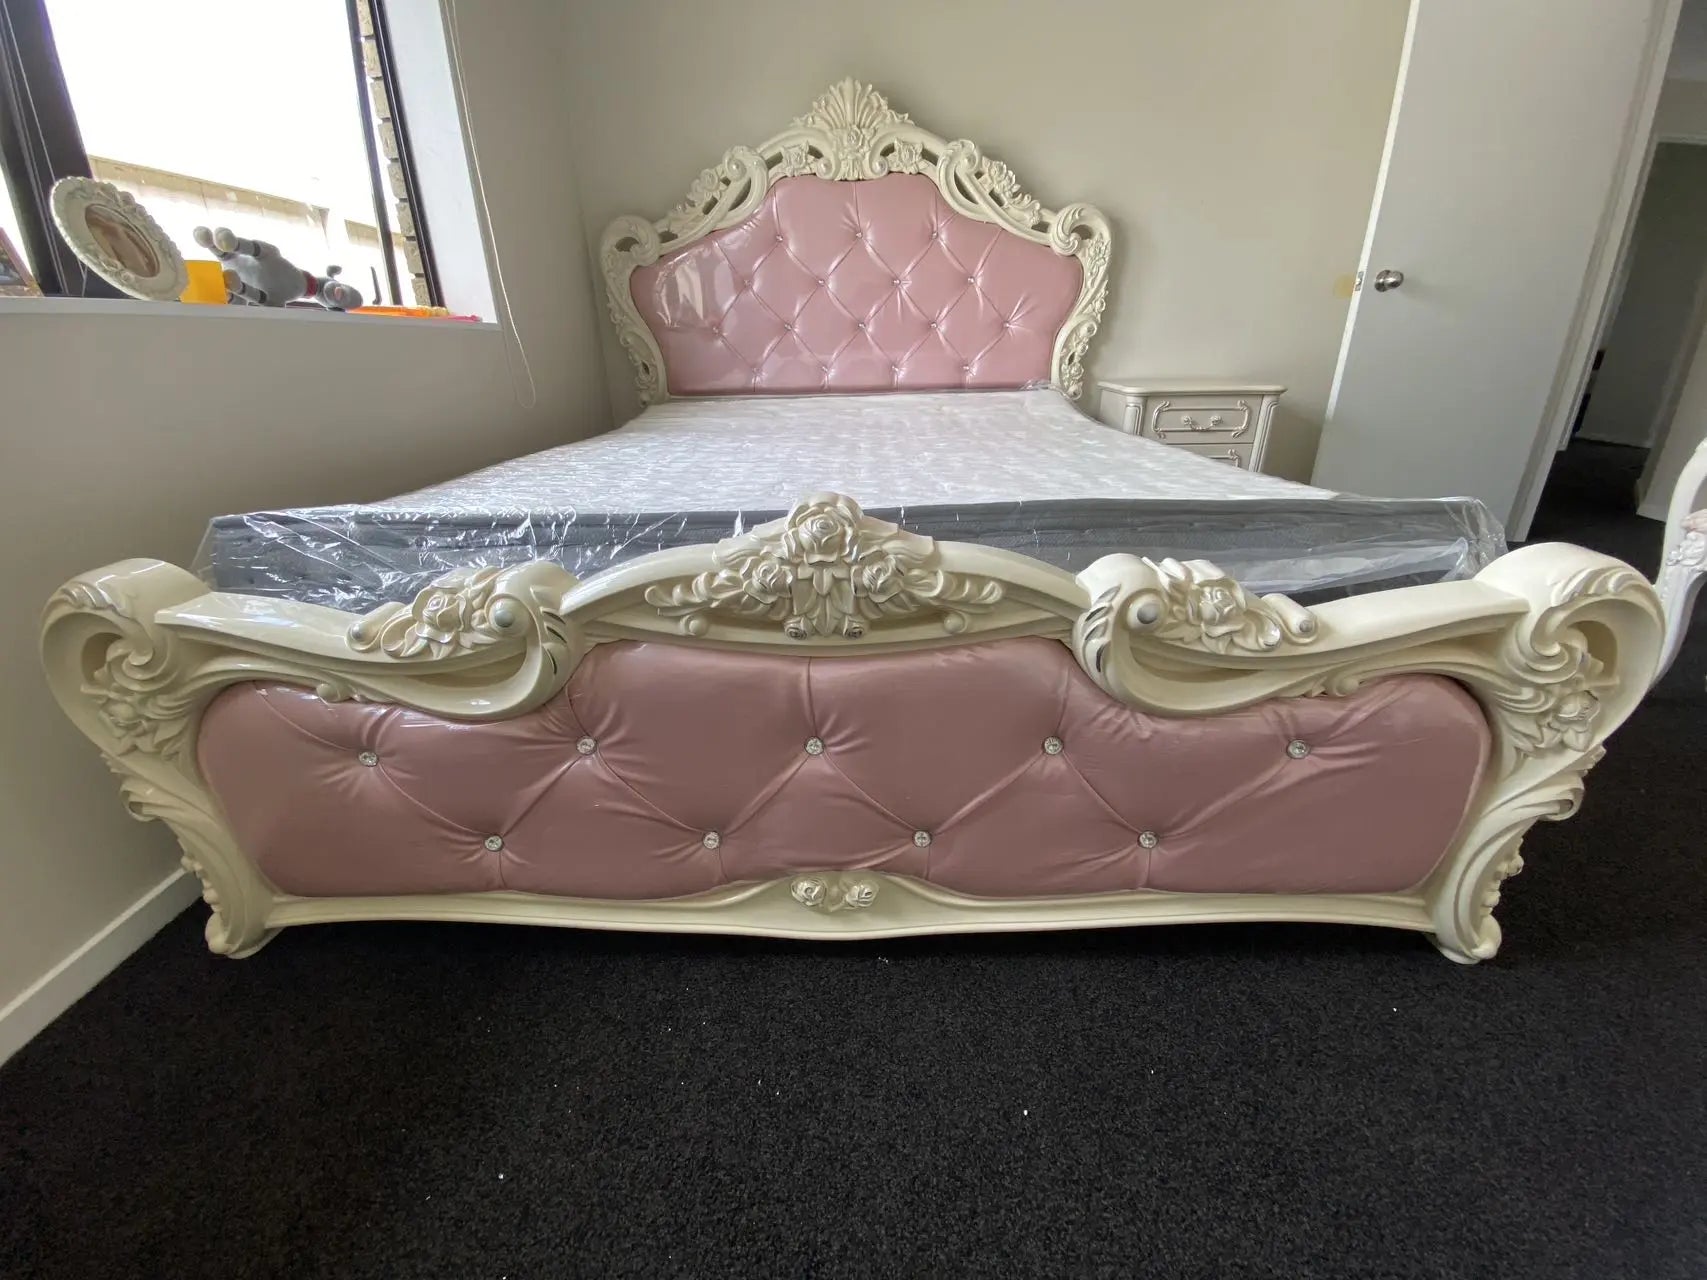 X01 Luxury Vintage Pink /White Frame Royal Style Bed - Super Outlets